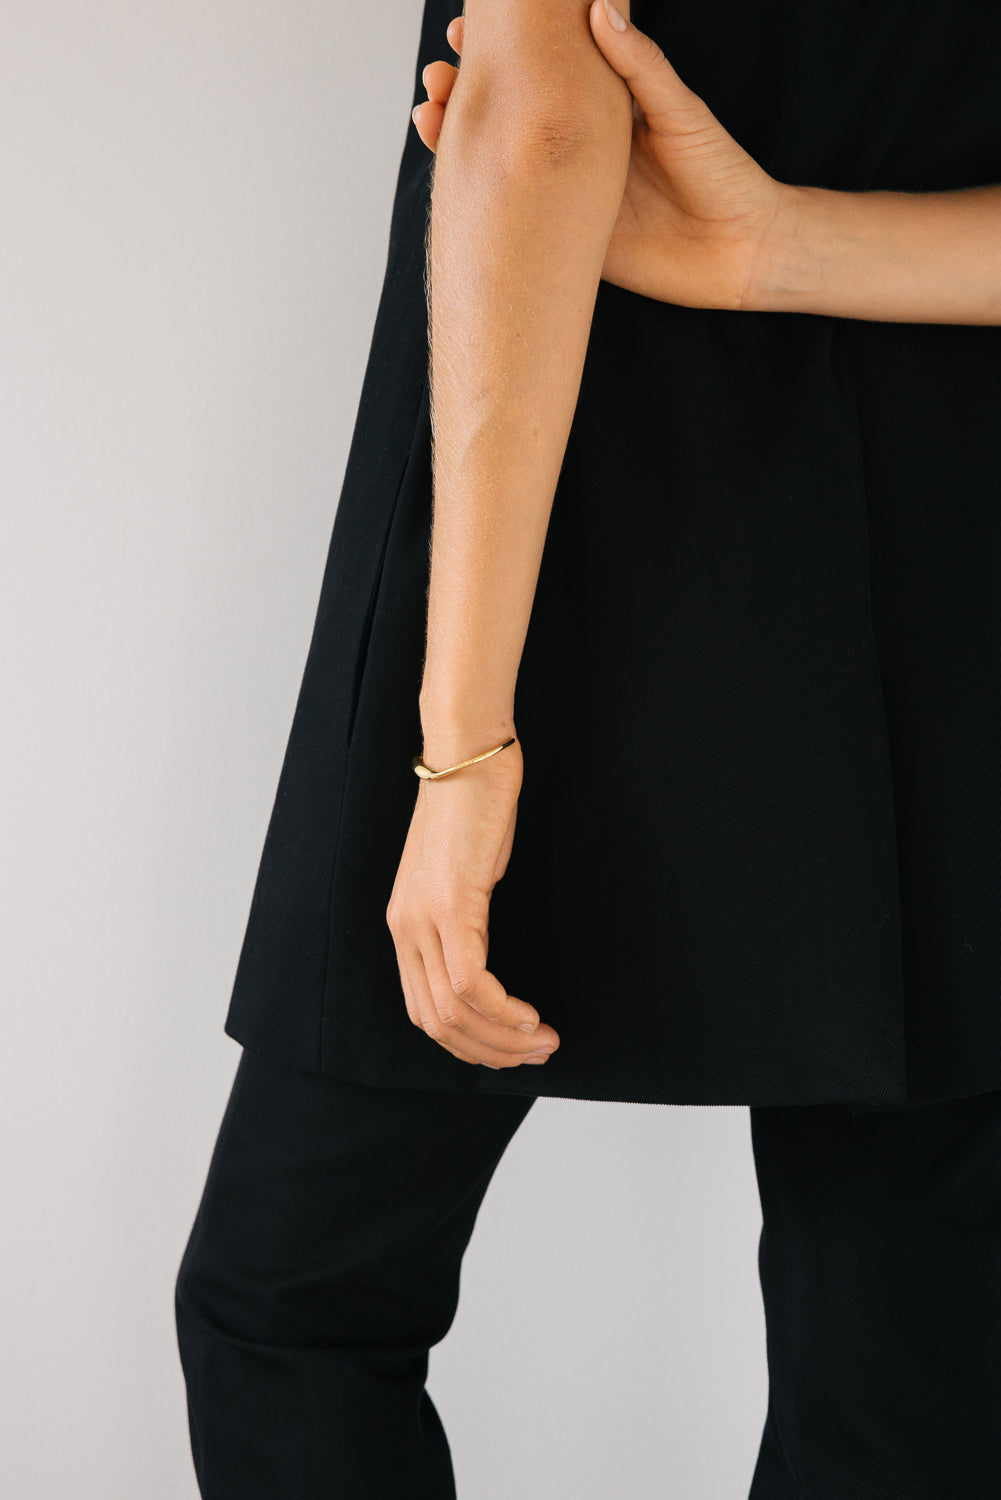 Lucid Wrist Cuff - Gold | Low In Stock